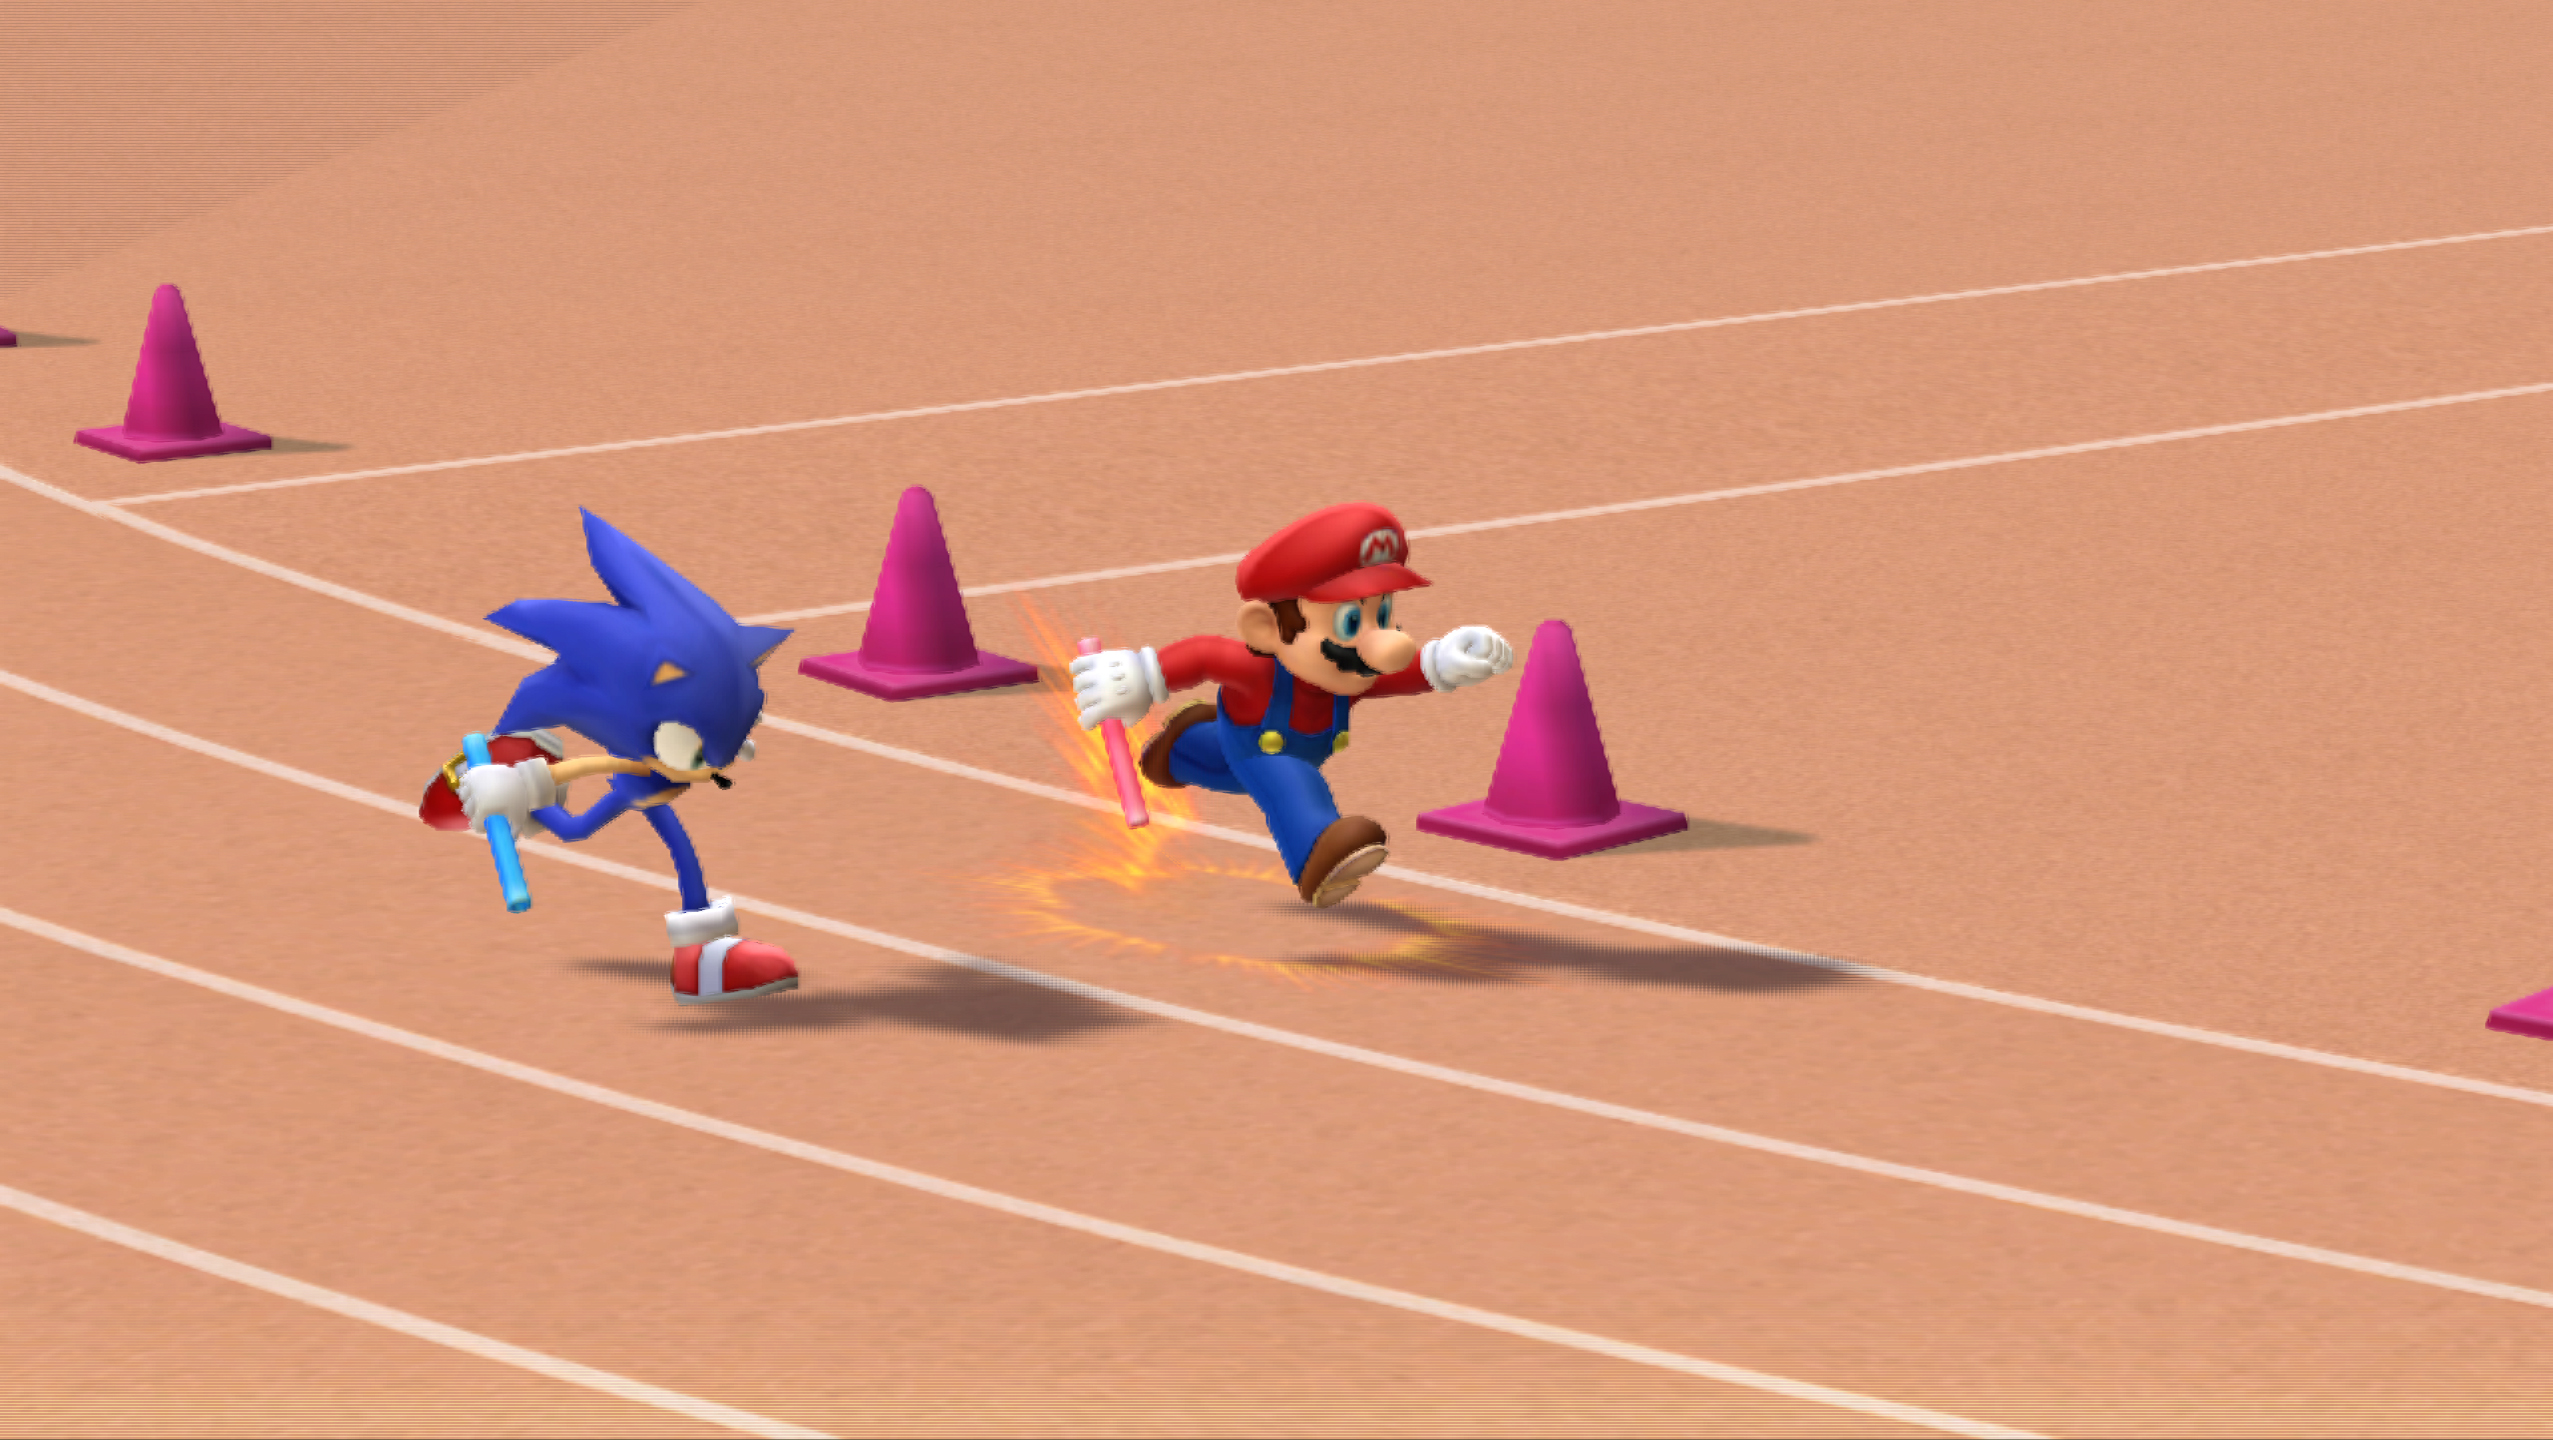 mario and sonic: london olympic games